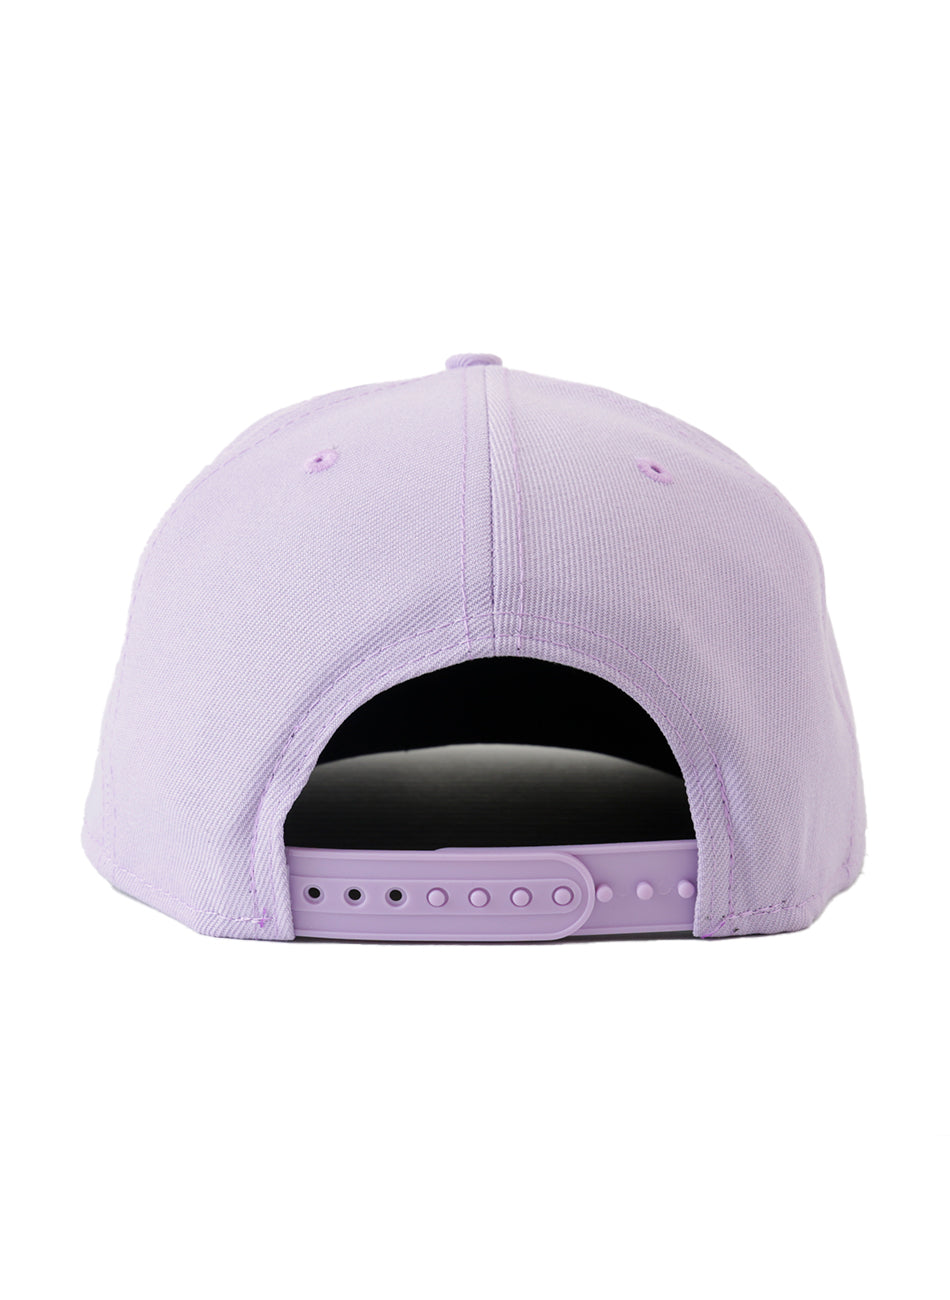 NY Yankees Color Pack 5950 Fitted Cap - Light Purple